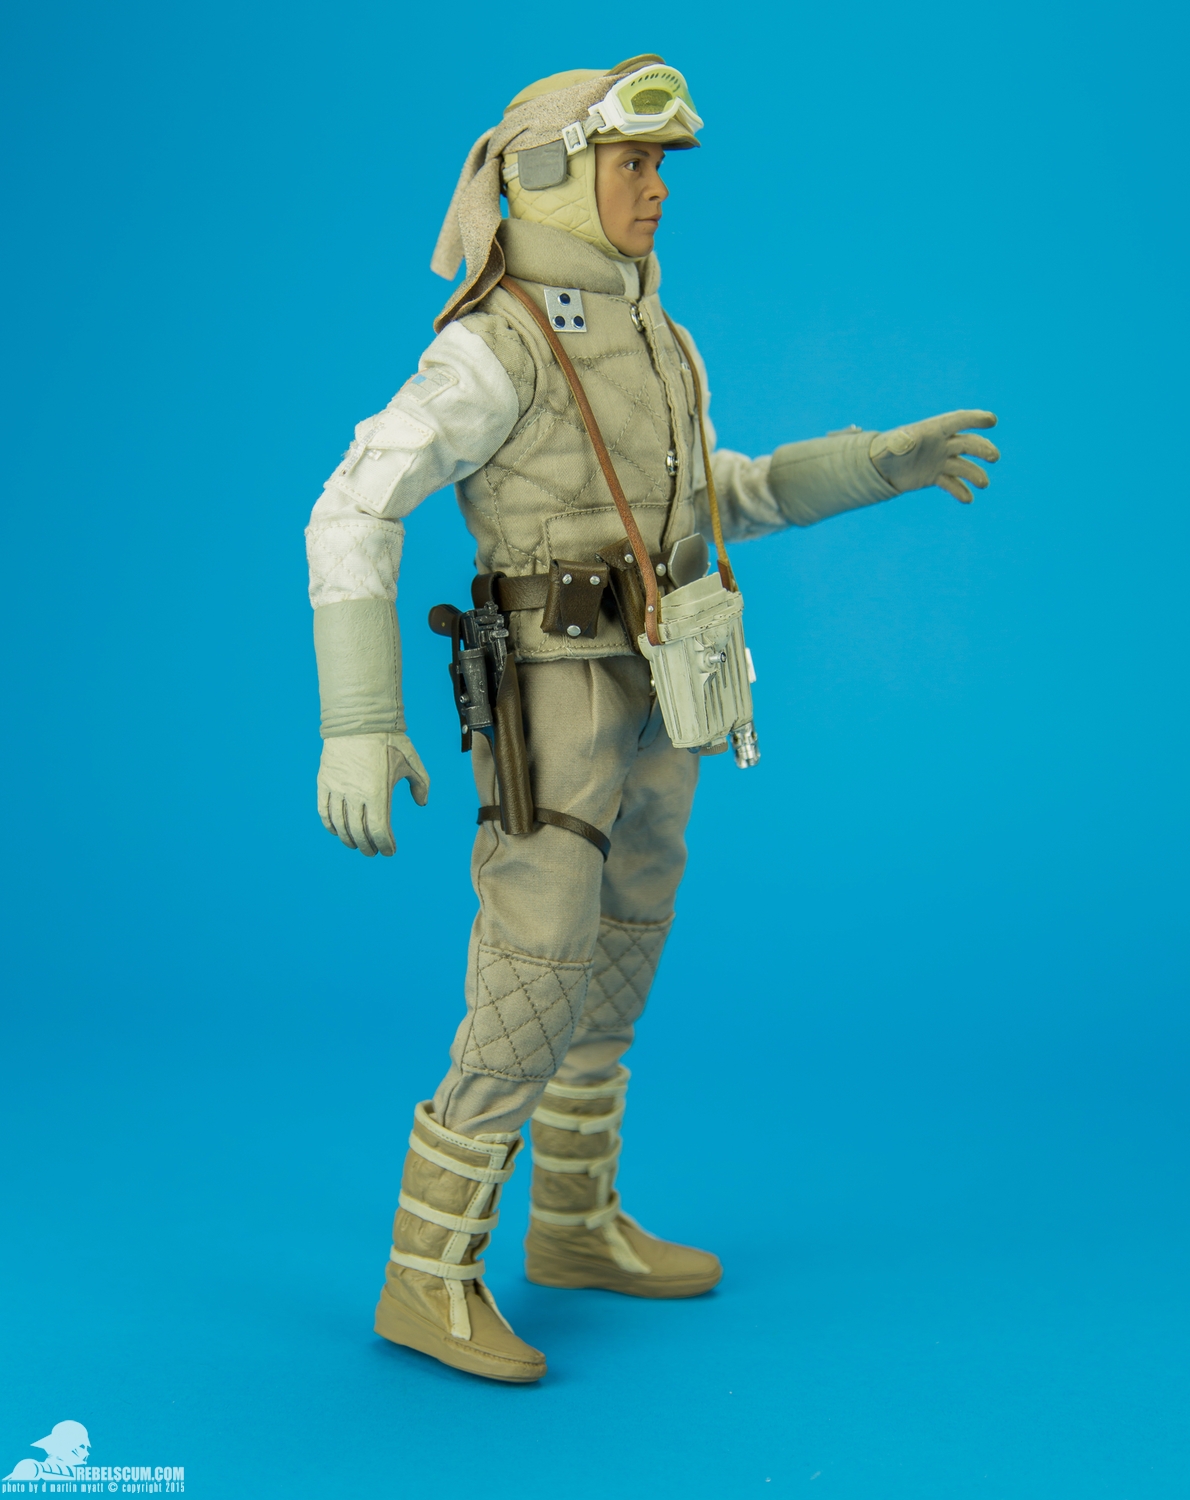 Luke-Skywalker-Hoth-Sixth-Scale-Sideshow-Collectibles-Star-Wars-006.jpg